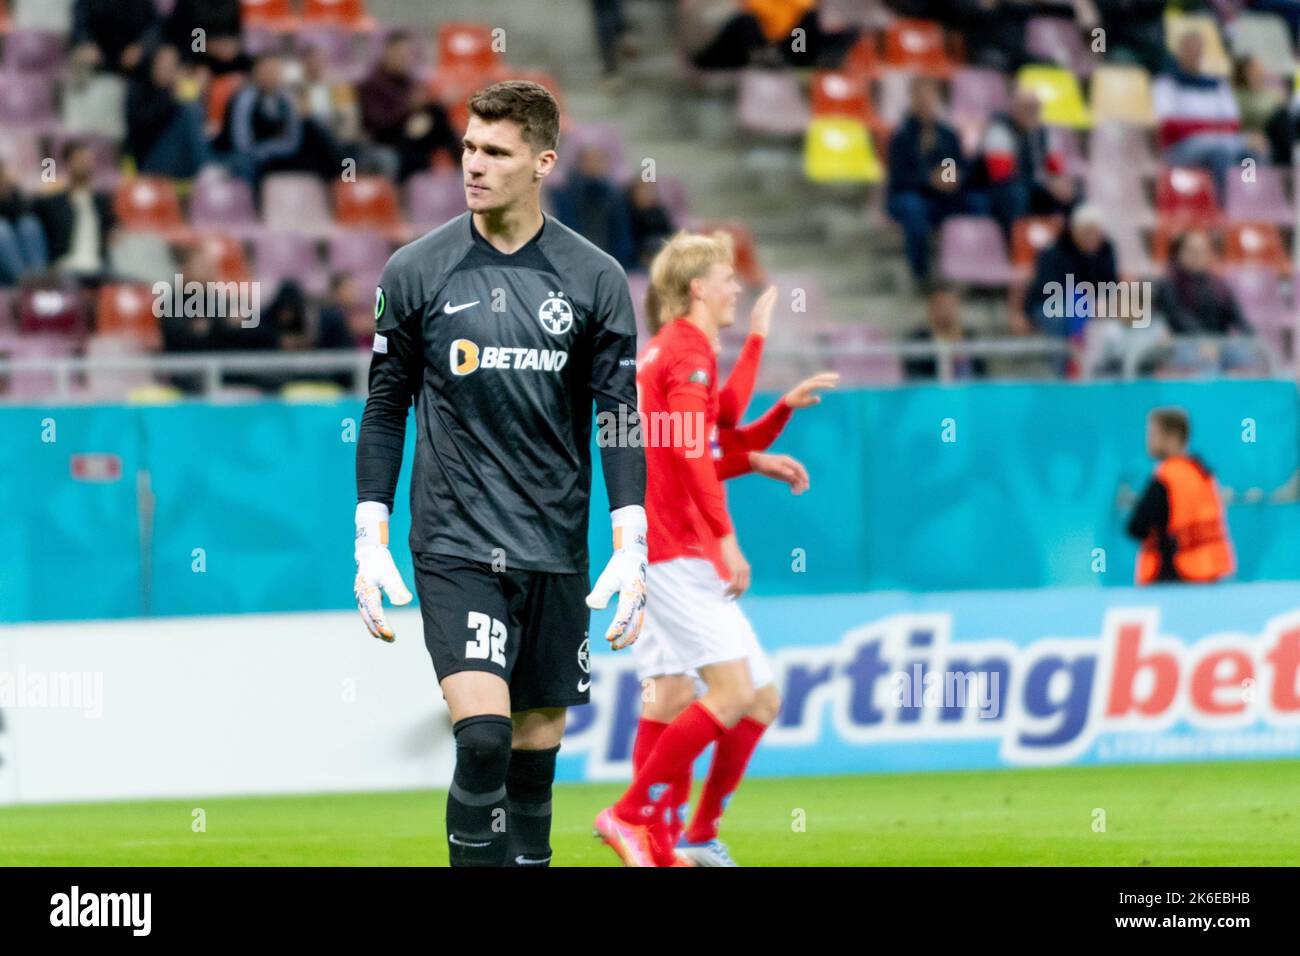 Bucharest, Romania. 14th Oct, 2022. October 14, 2022: Stefan Tarnovanu #32 of FCSB disappointed during of the UEFA Europa Conference League group B match between FCSB Bucharest and Silkeborg IF at National Arena Stadium in Bucharest, Romania ROU. Catalin Soare/Cronos Credit: Cronos/Alamy Live News Stock Photo